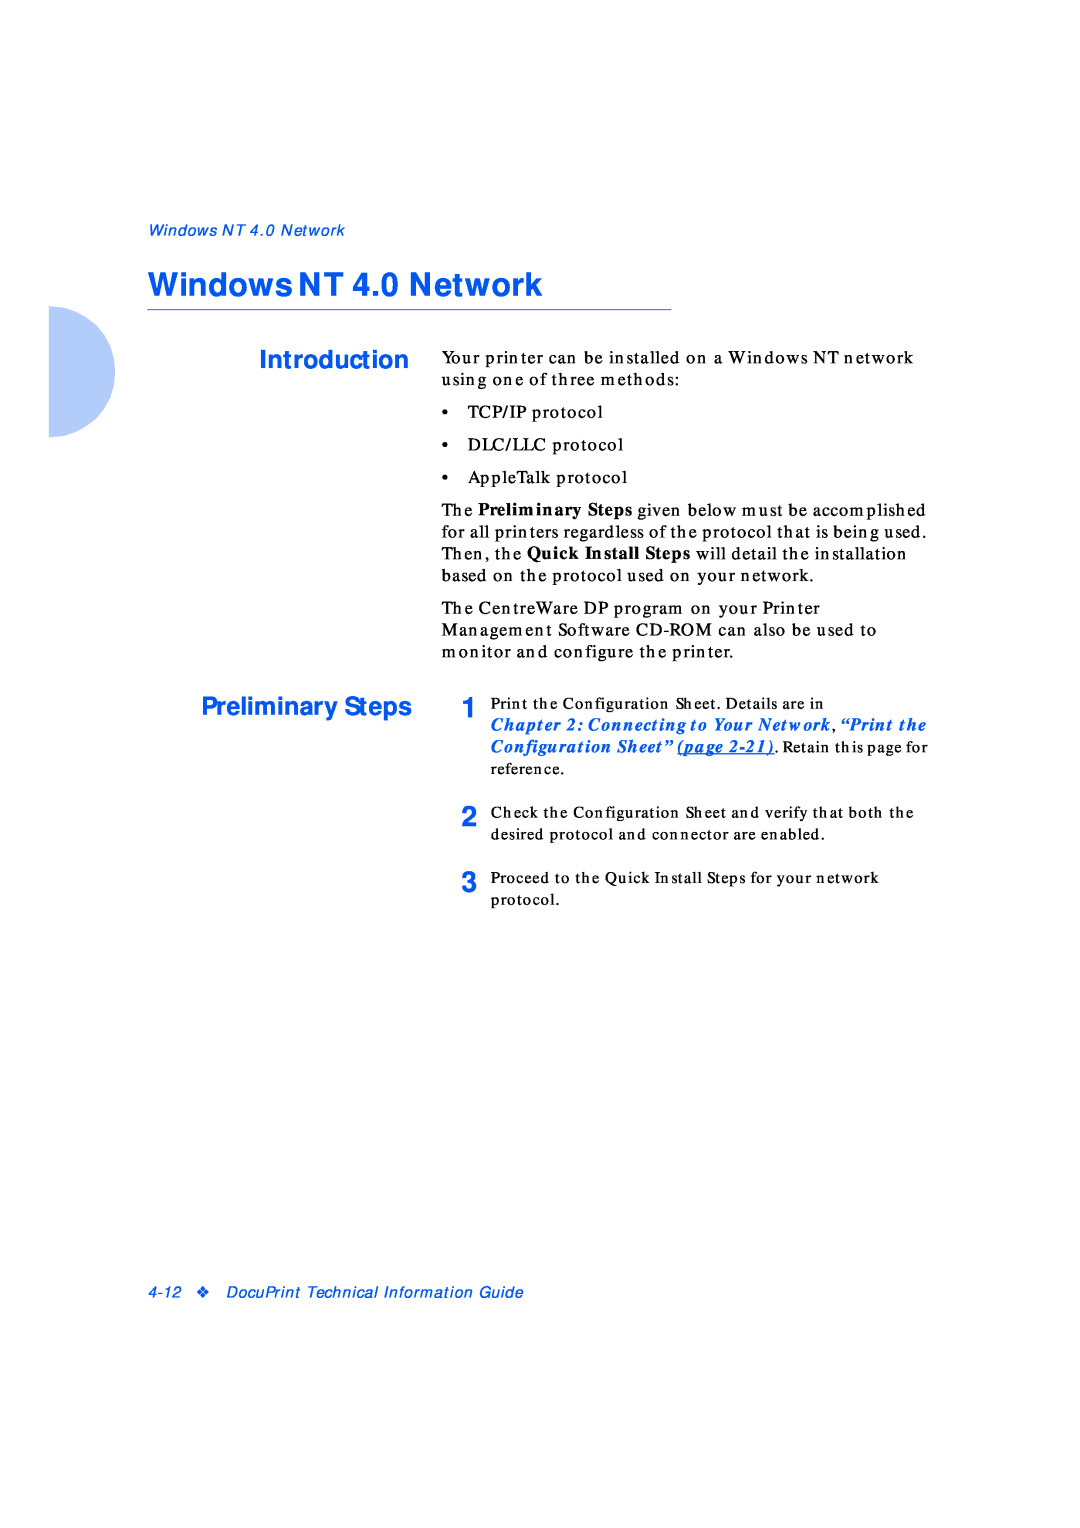 Xerox Network Laser Printers manual Windows NT 4.0 Network, Introduction Preliminary Steps 